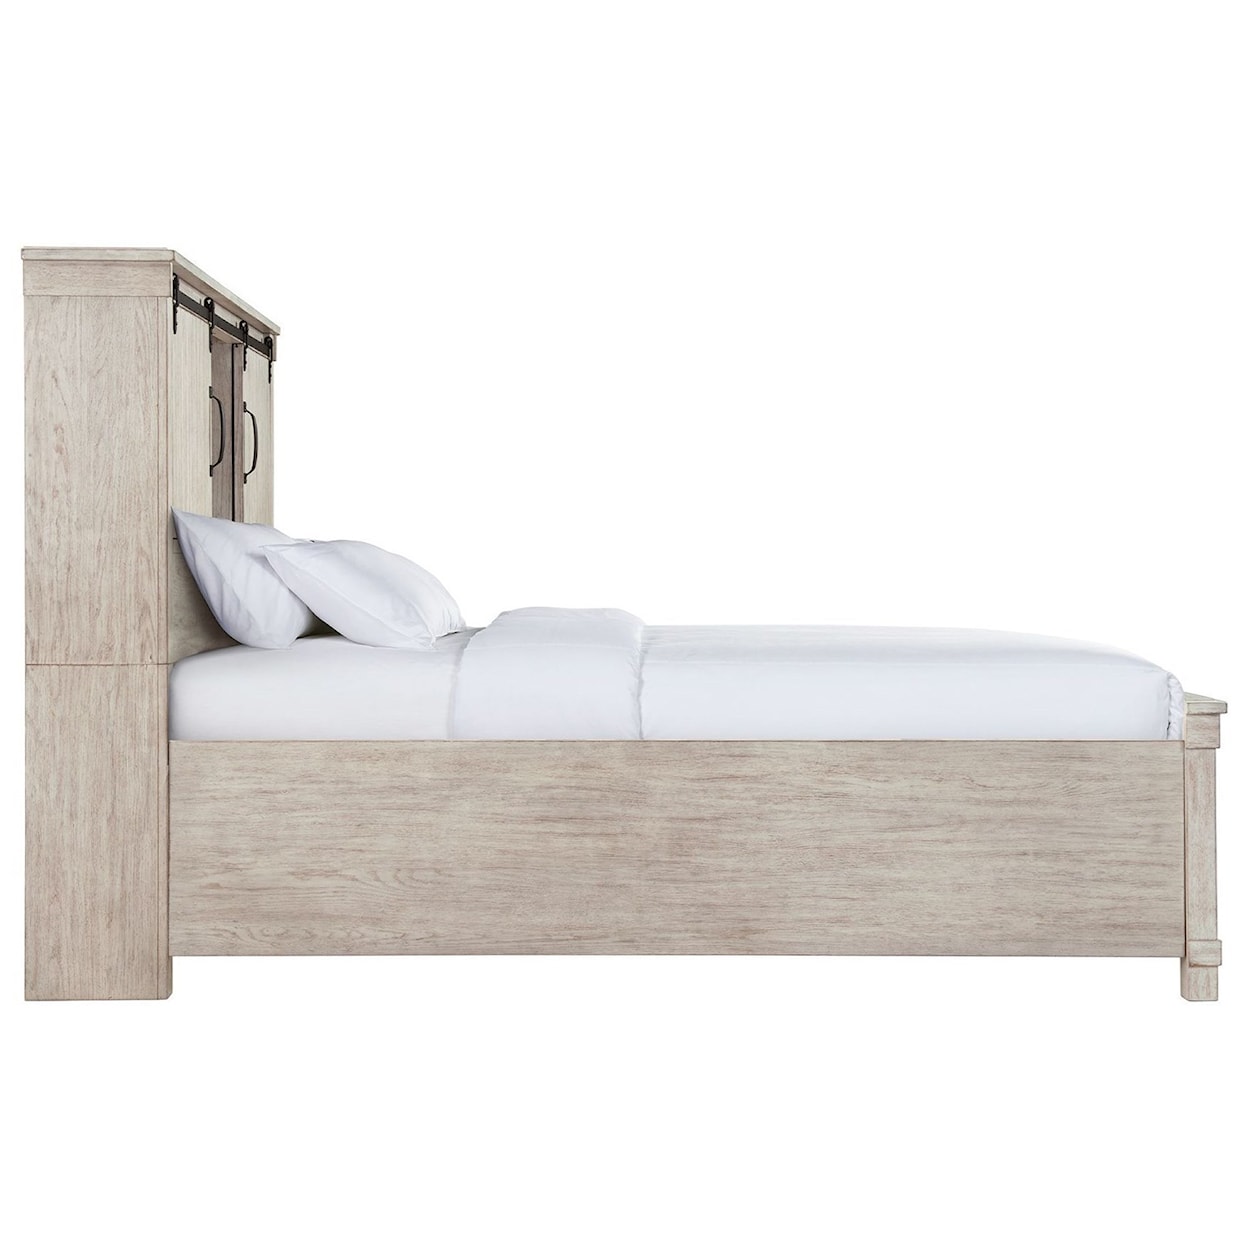 ELE Malone Queen Bed with Storage